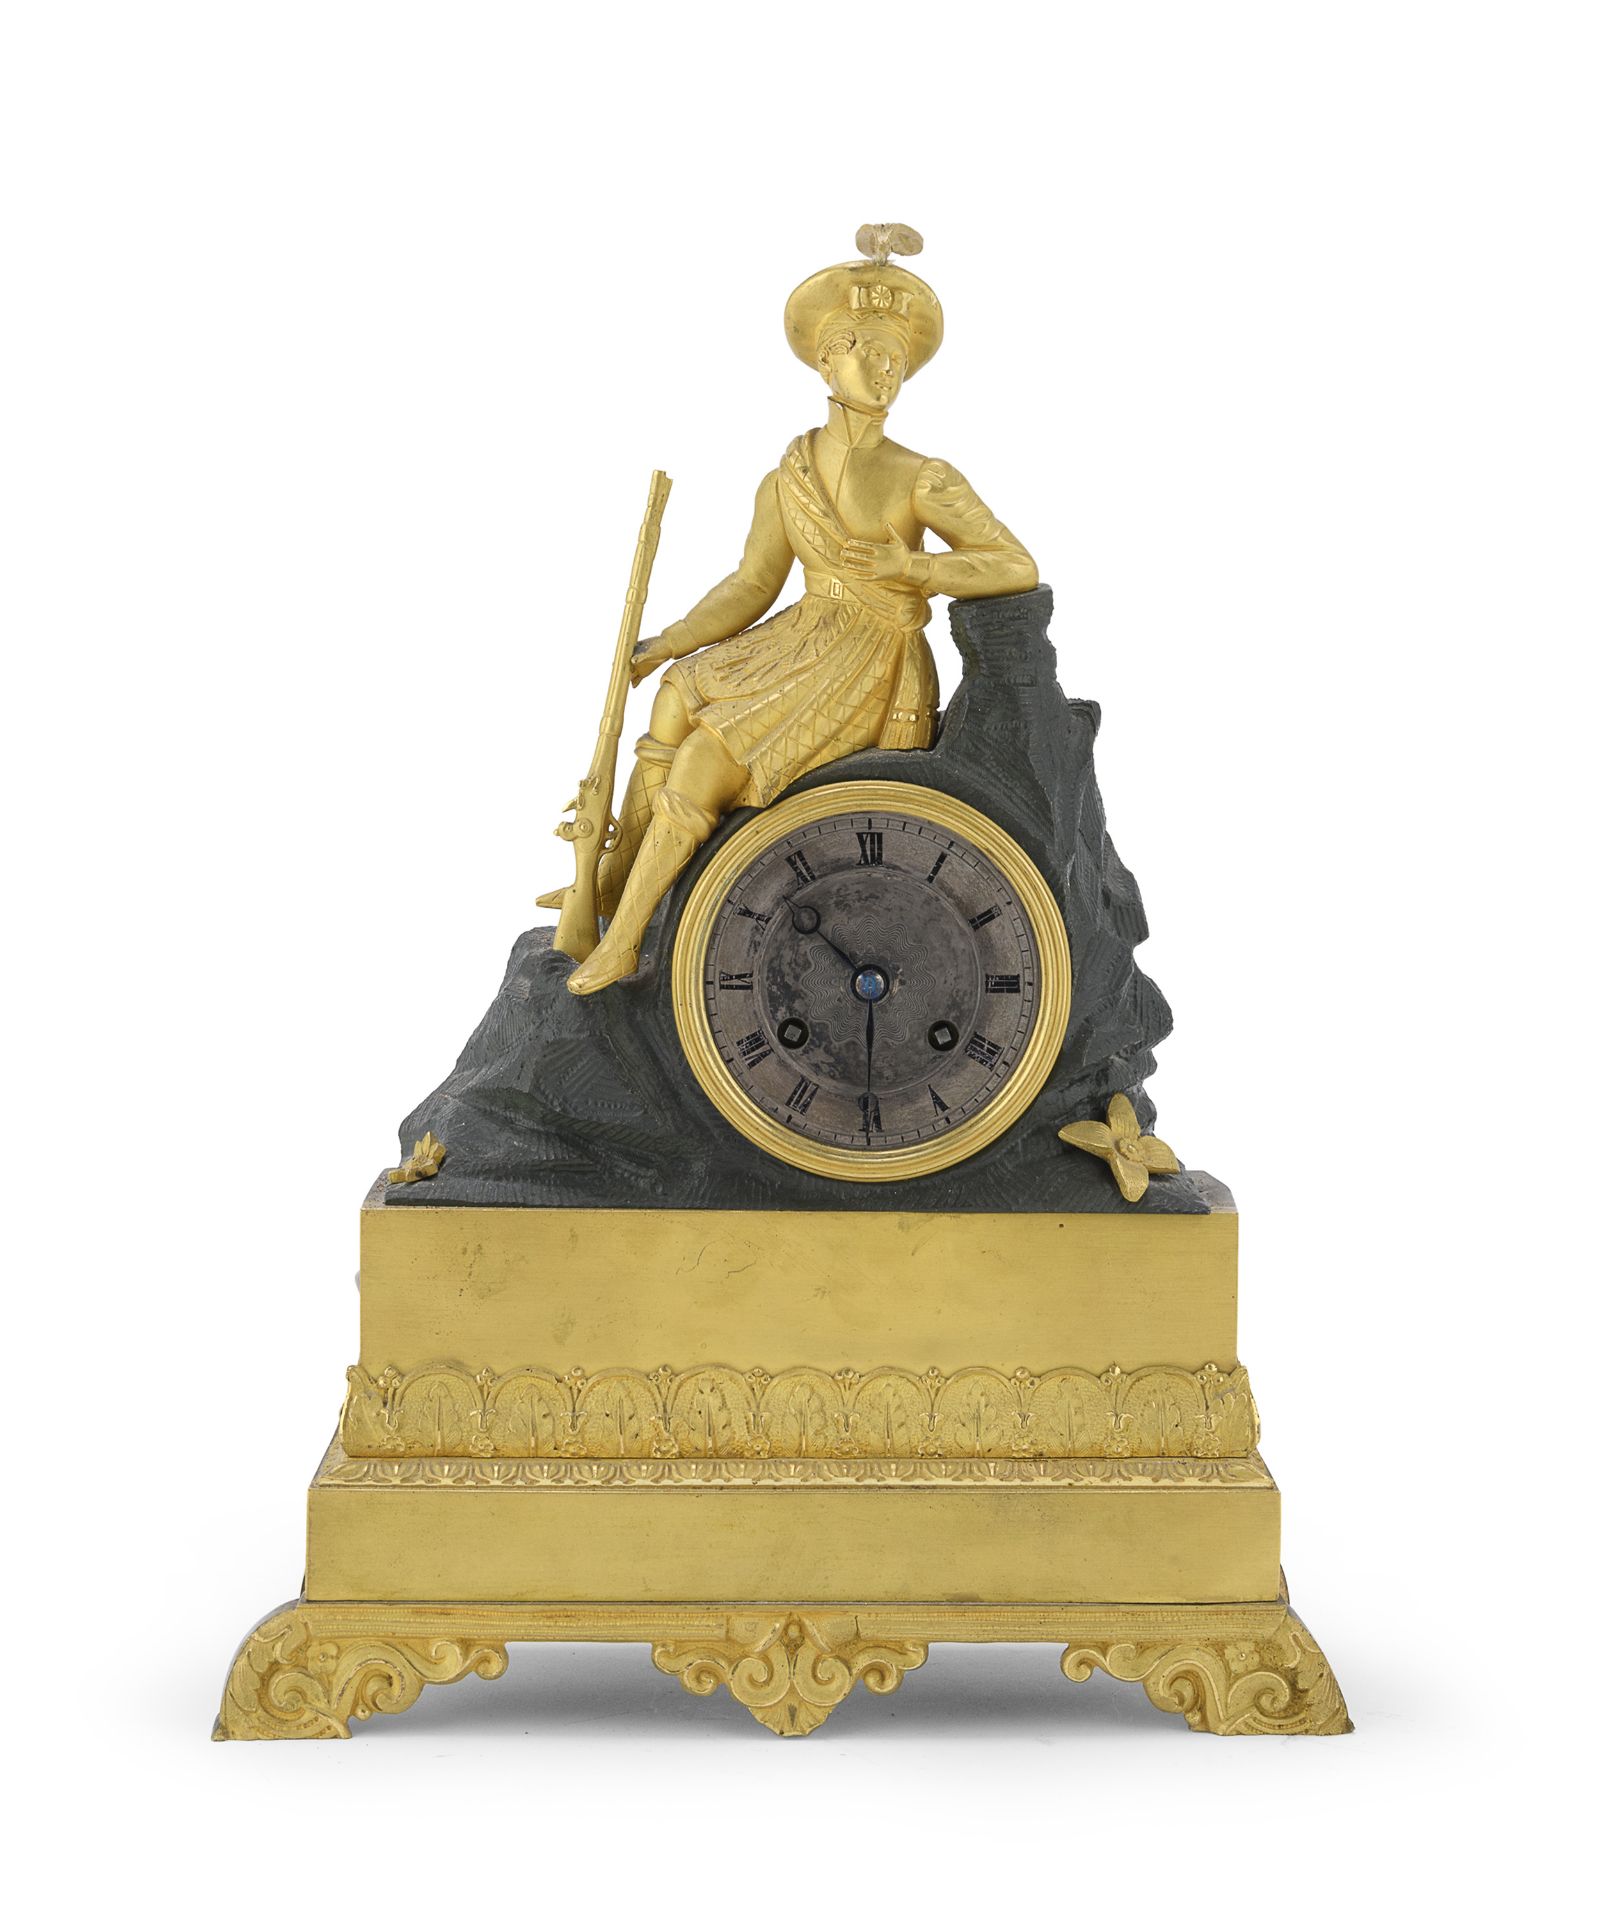 SMALL BRONZE TABLE CLOCK EARLY 19TH CENTURY